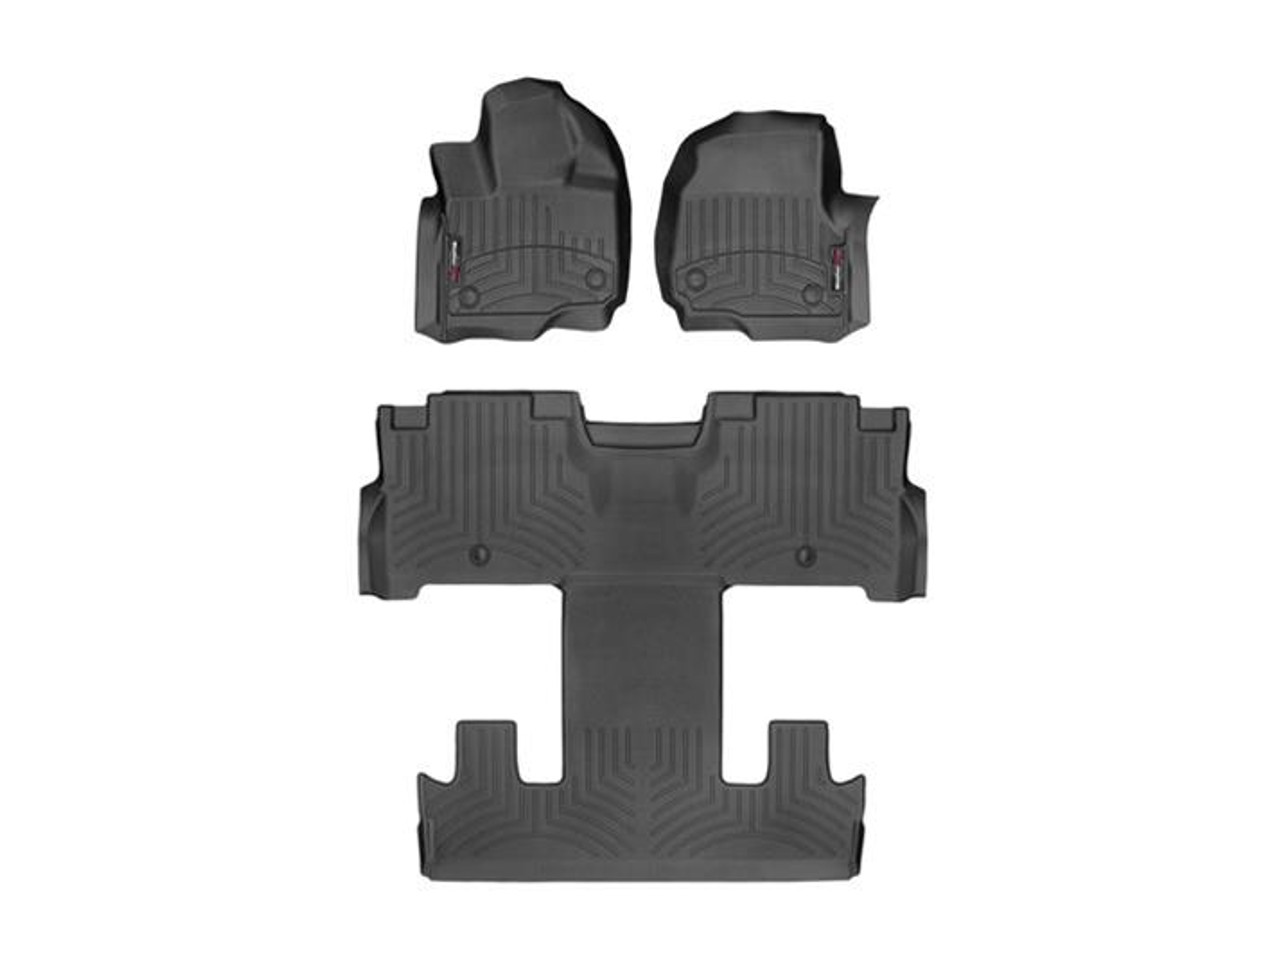 WeatherTech 2018+ Ford Expedition Front and Rear FloorLiner - Black (w/ 2nd Row Bucket Seats) - 441295-1-5